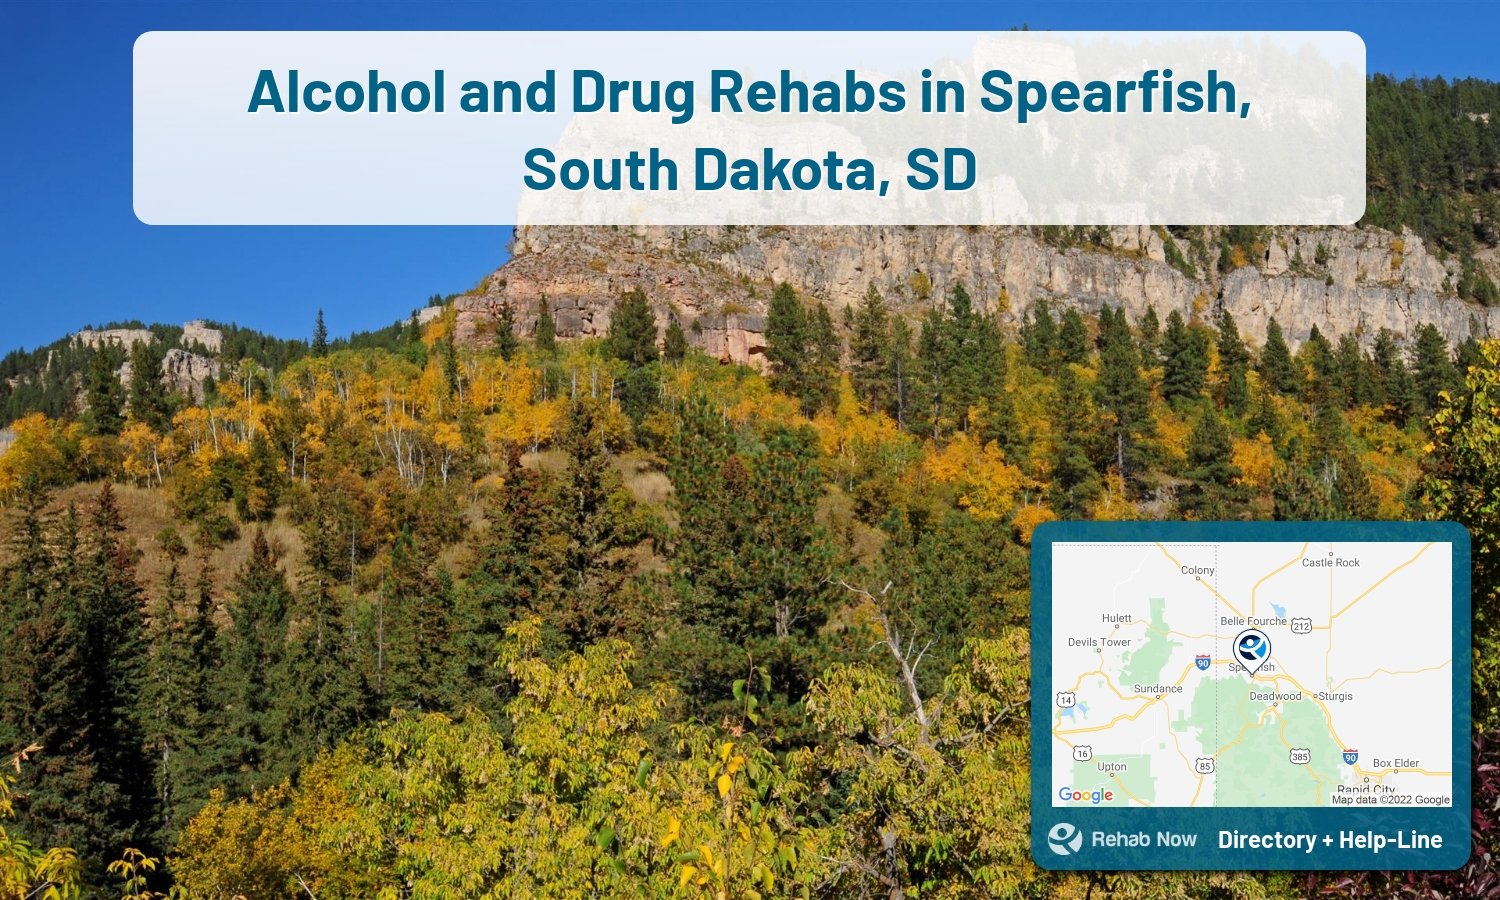 Drug rehab and alcohol treatment services nearby Spearfish, SD. Need help choosing a treatment program? Call our free hotline!